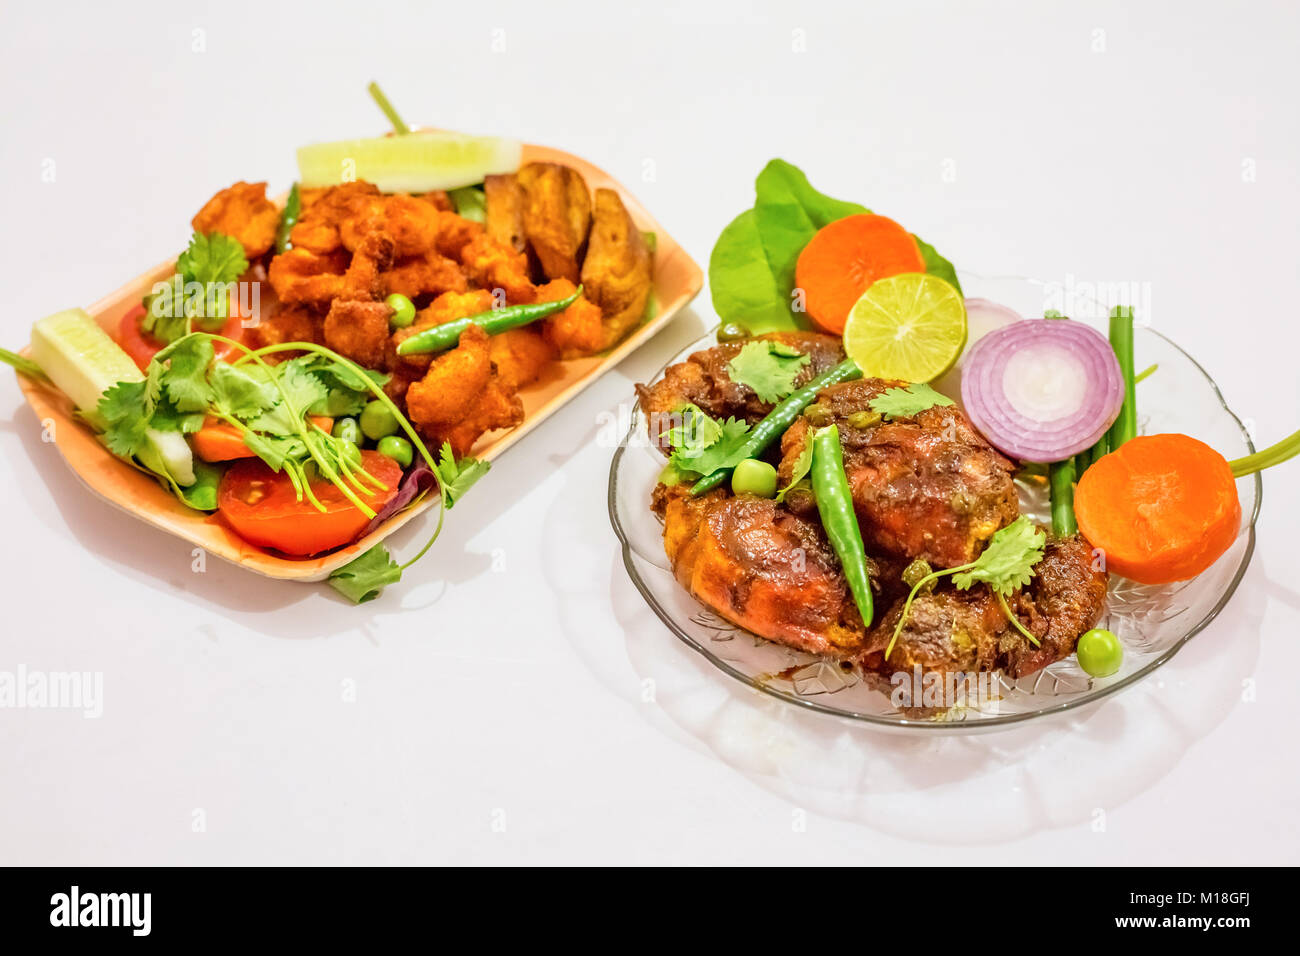 Delicious spicy Indian starter dish of deep fried crispy prawn and boneless chicken pakora. Bengali Indian cuisine isolated on white background. Stock Photo